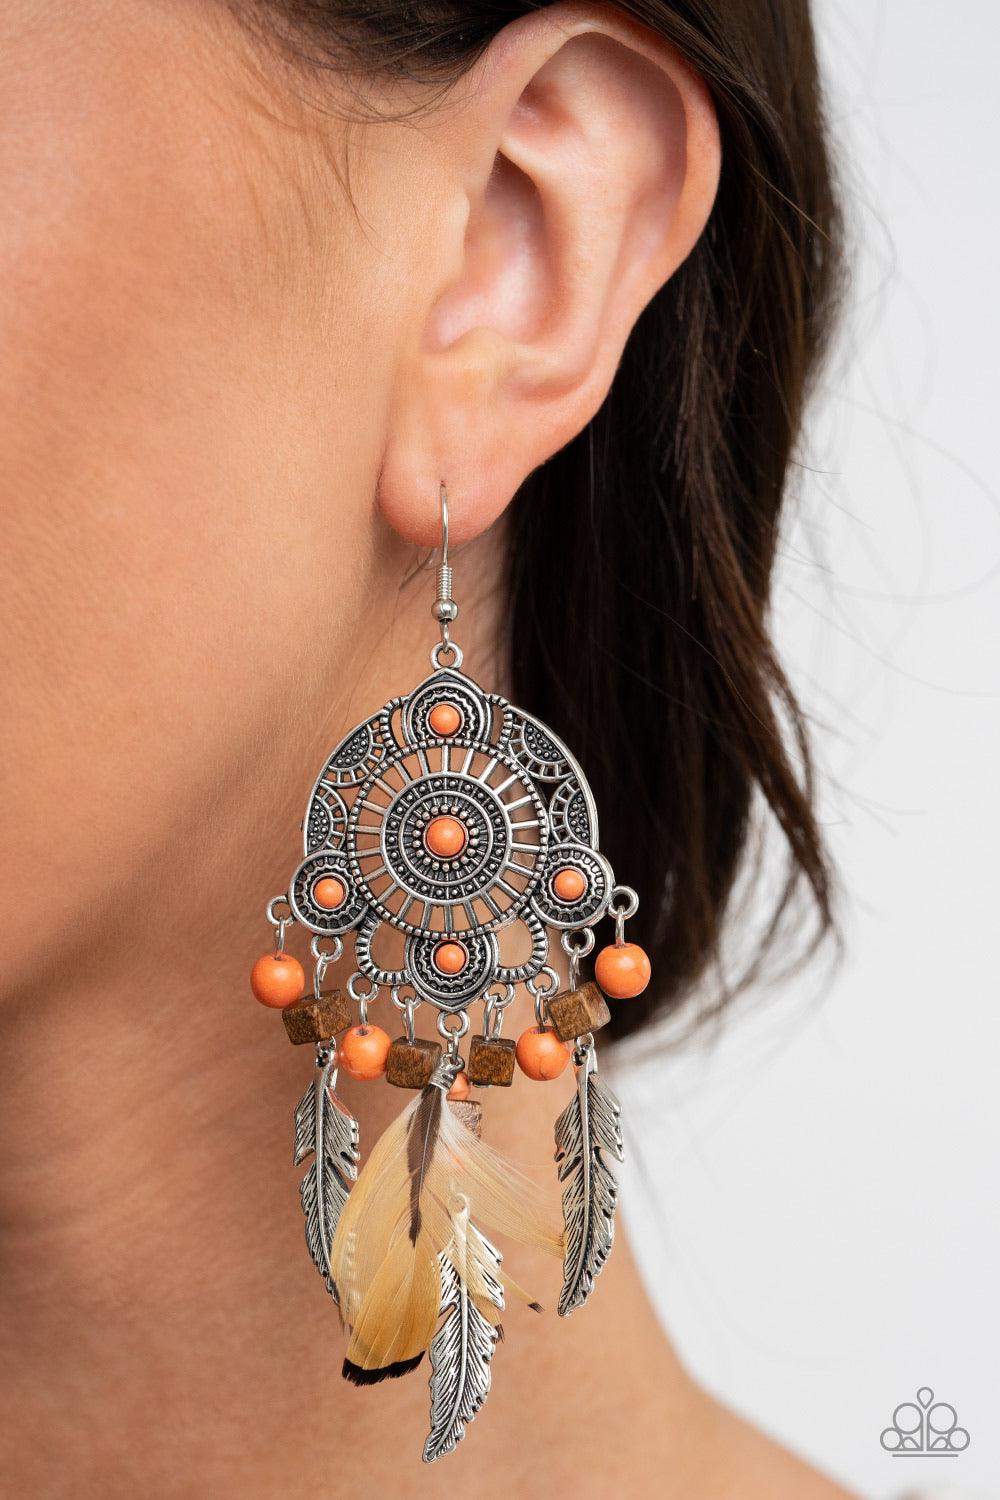 Paparazzi Accessories Desert Plains - Orange Radiating with studded patterns, an orange stone dotted silver frame gives way to a whimsical collection of silver feather charms, wooden cube beads, refreshing orange stones, and a brown feather, creating a wh